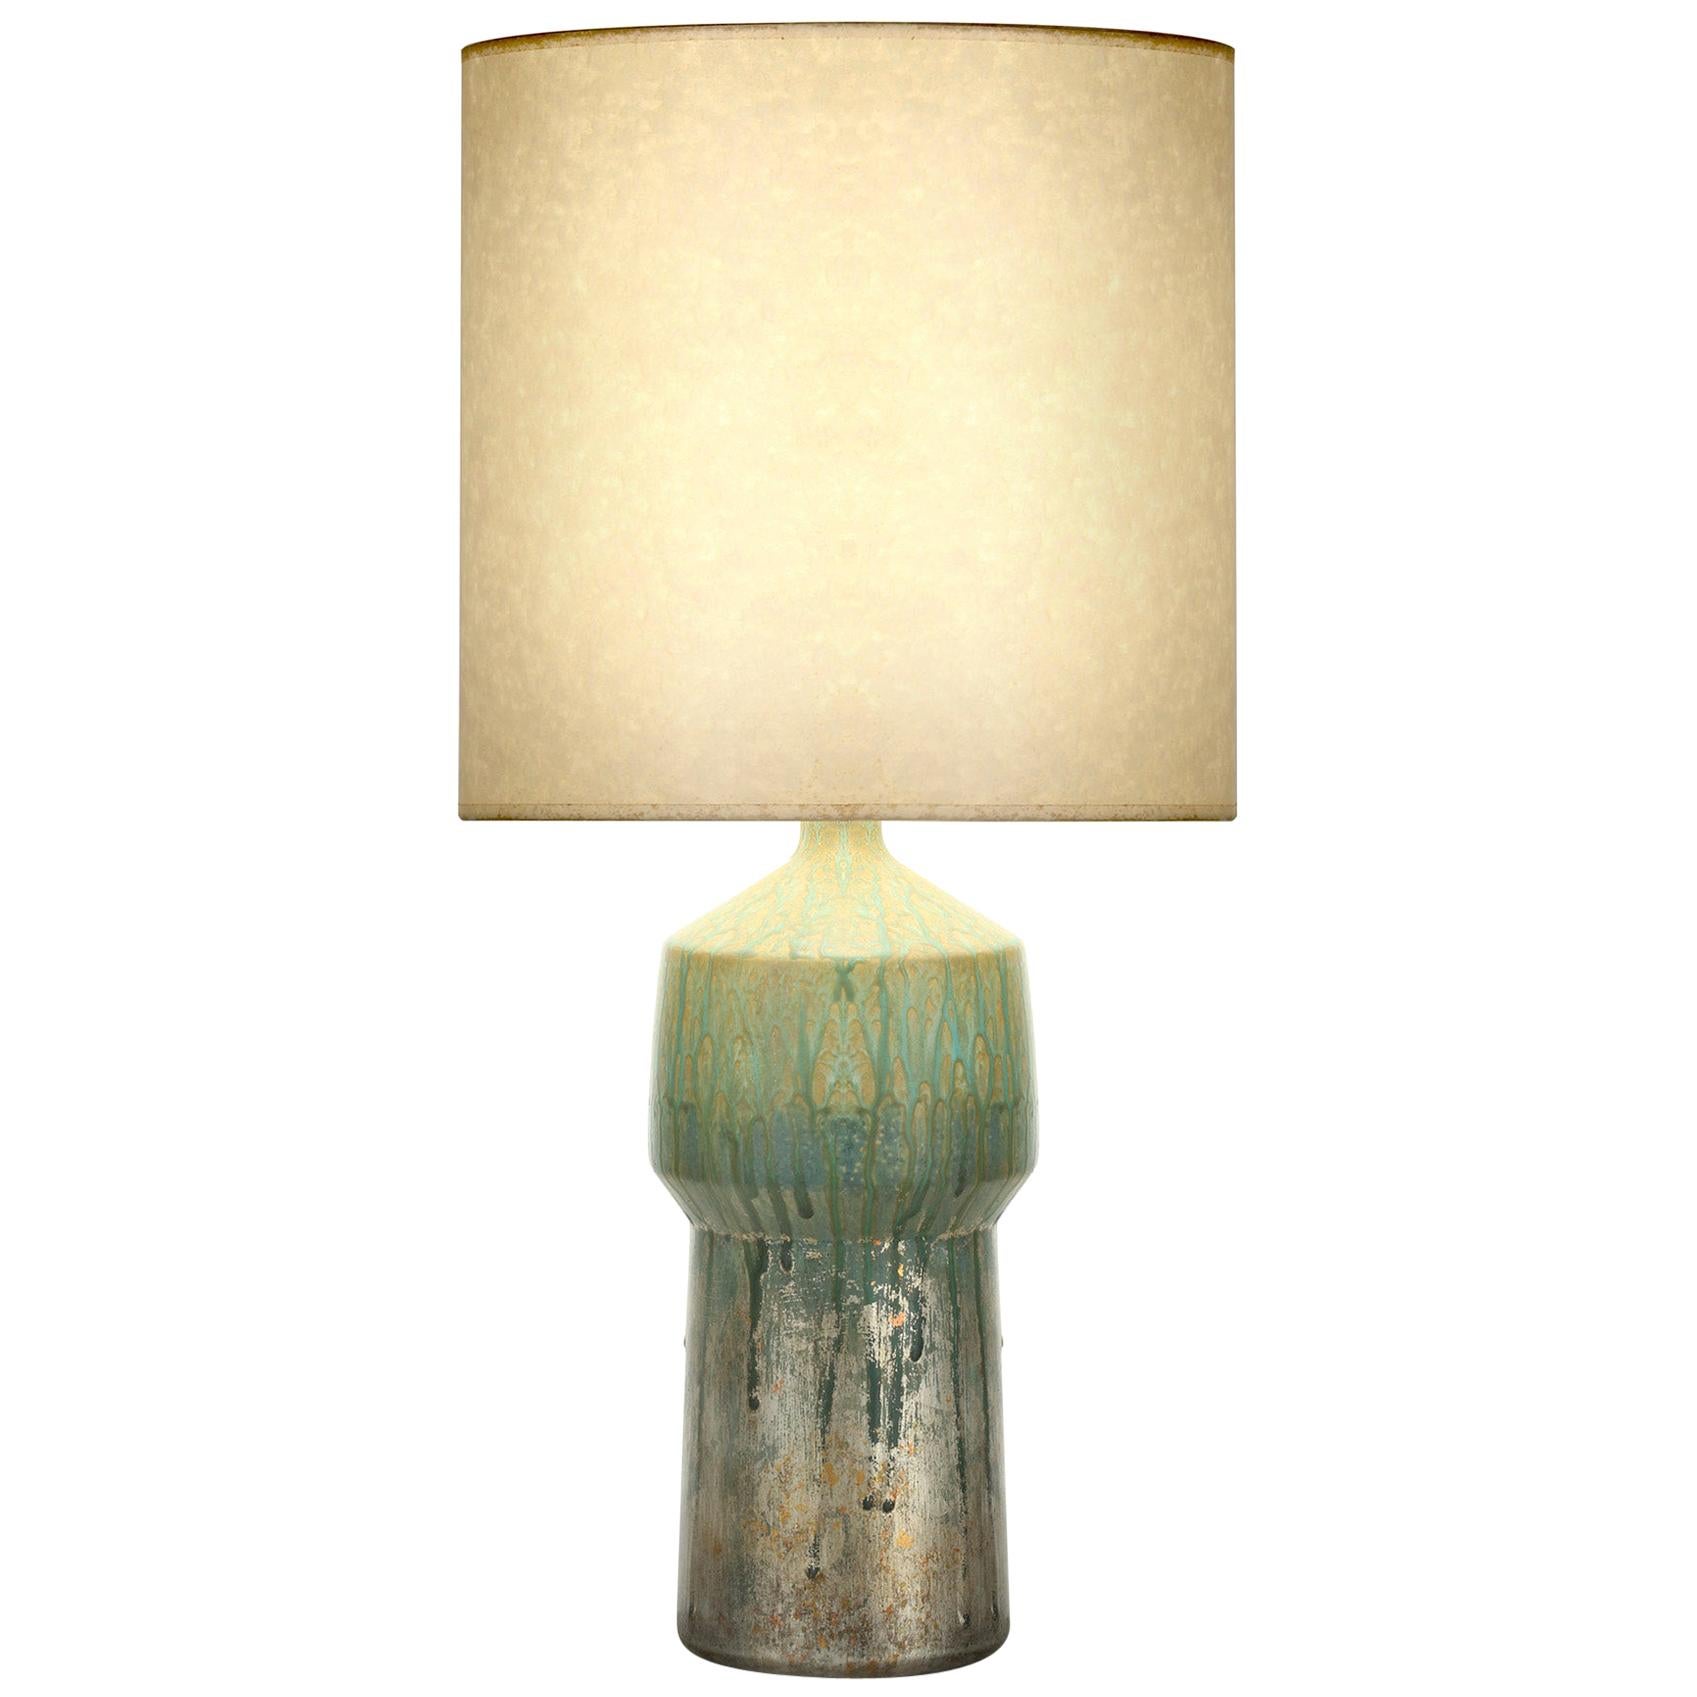 Peyton Table Lamp in Multicolor Green Ceramic by CuratedKravet